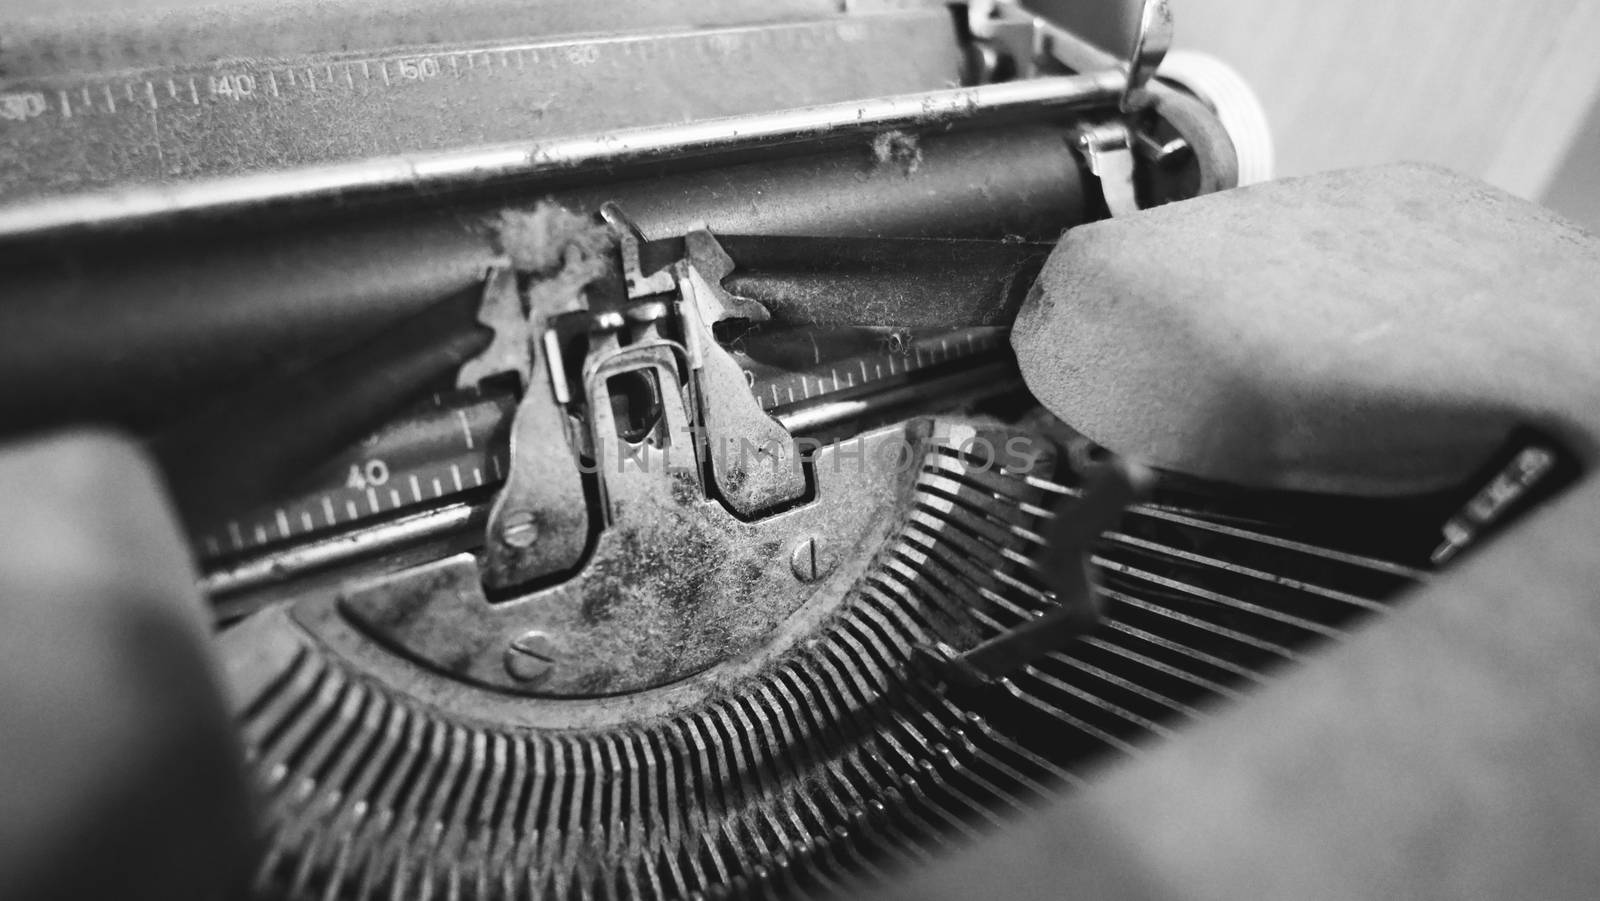 Old typewriter machine in good condition with no paper in feed  by gnepphoto